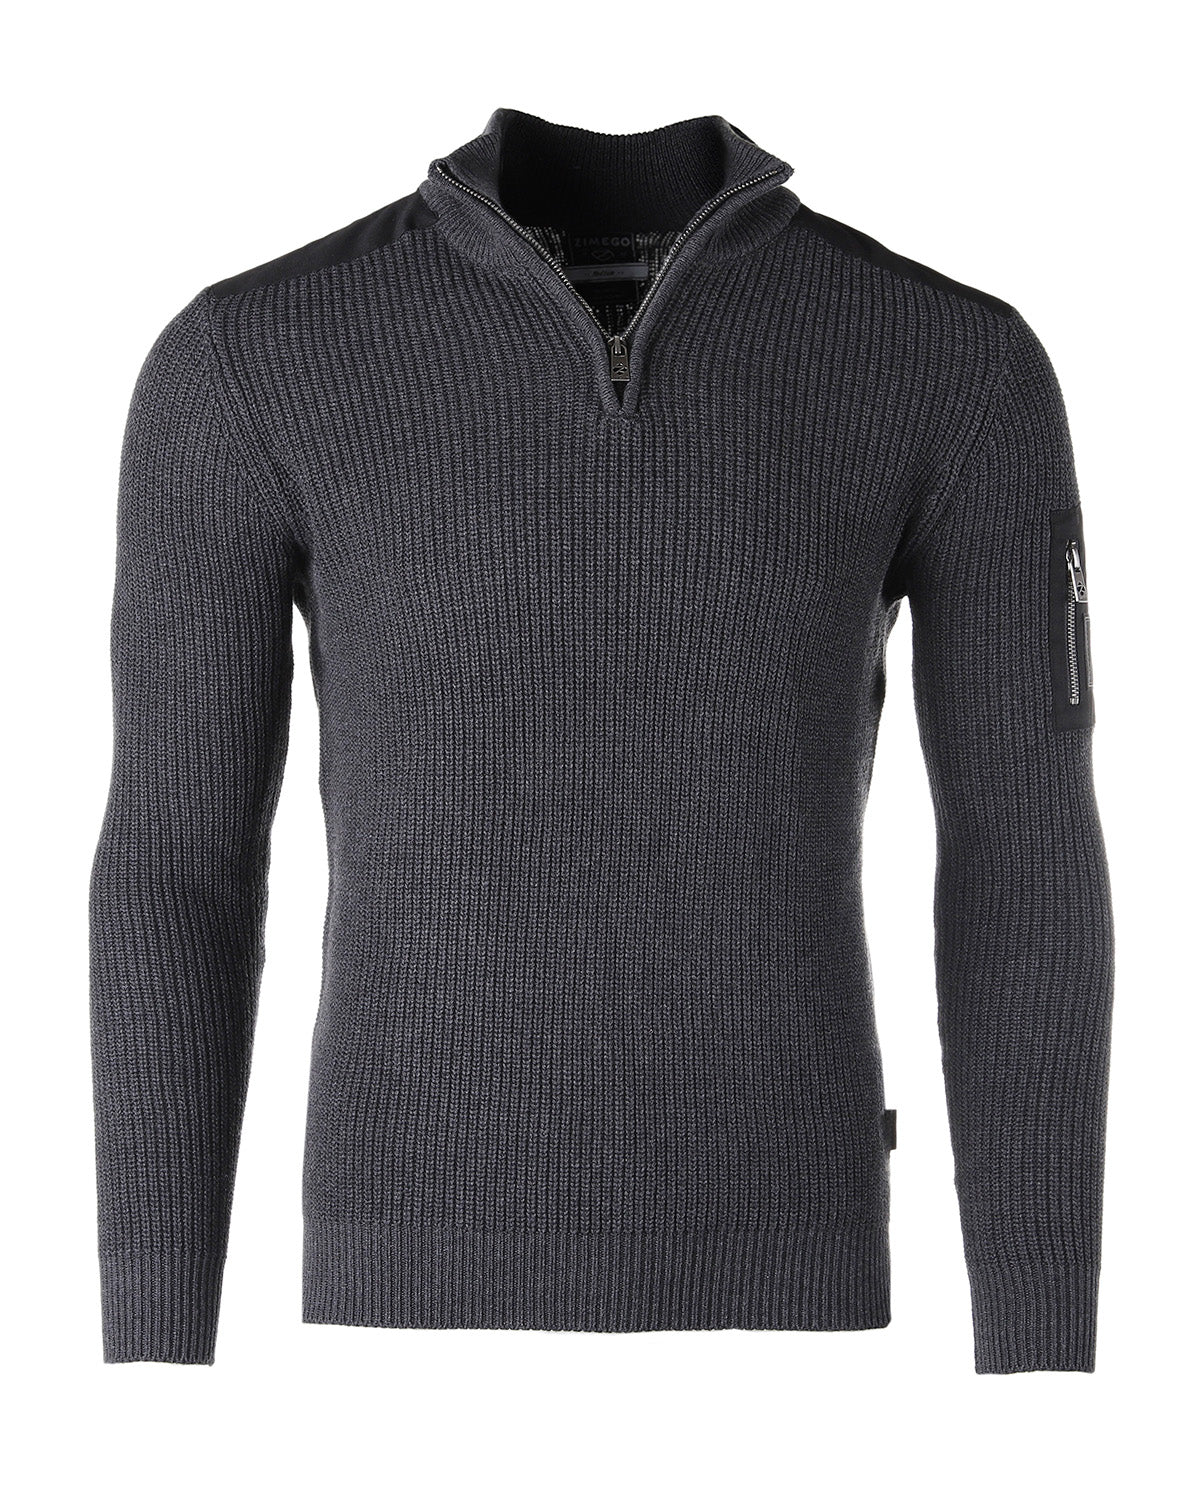 Men's Long Sleeve Pullover Quarter Zip Mock Neck Polo Sweater with Pocket Charcoal